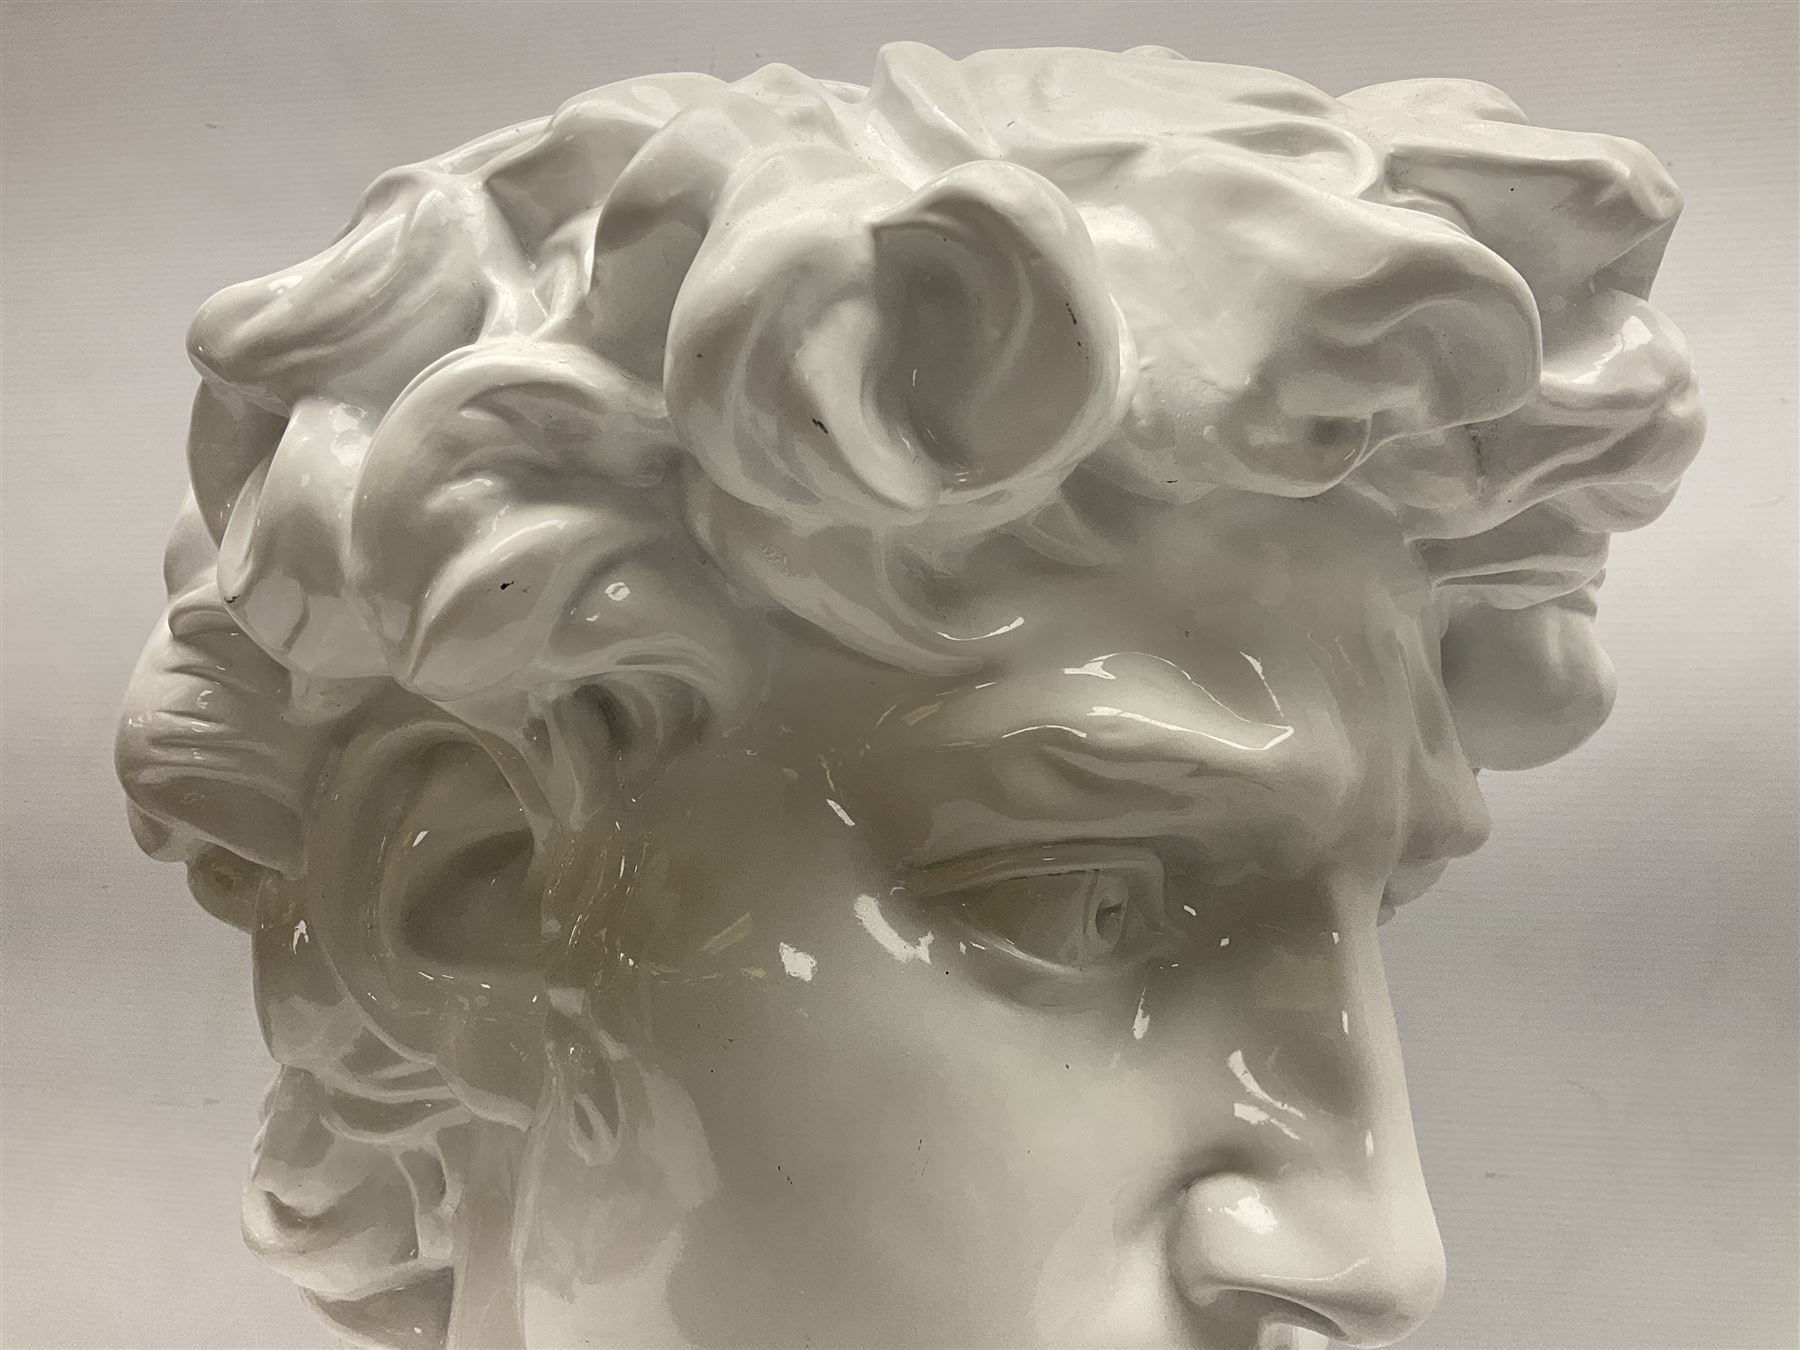 Large bust of Michelangelo's David in glossy white finish - Image 2 of 10